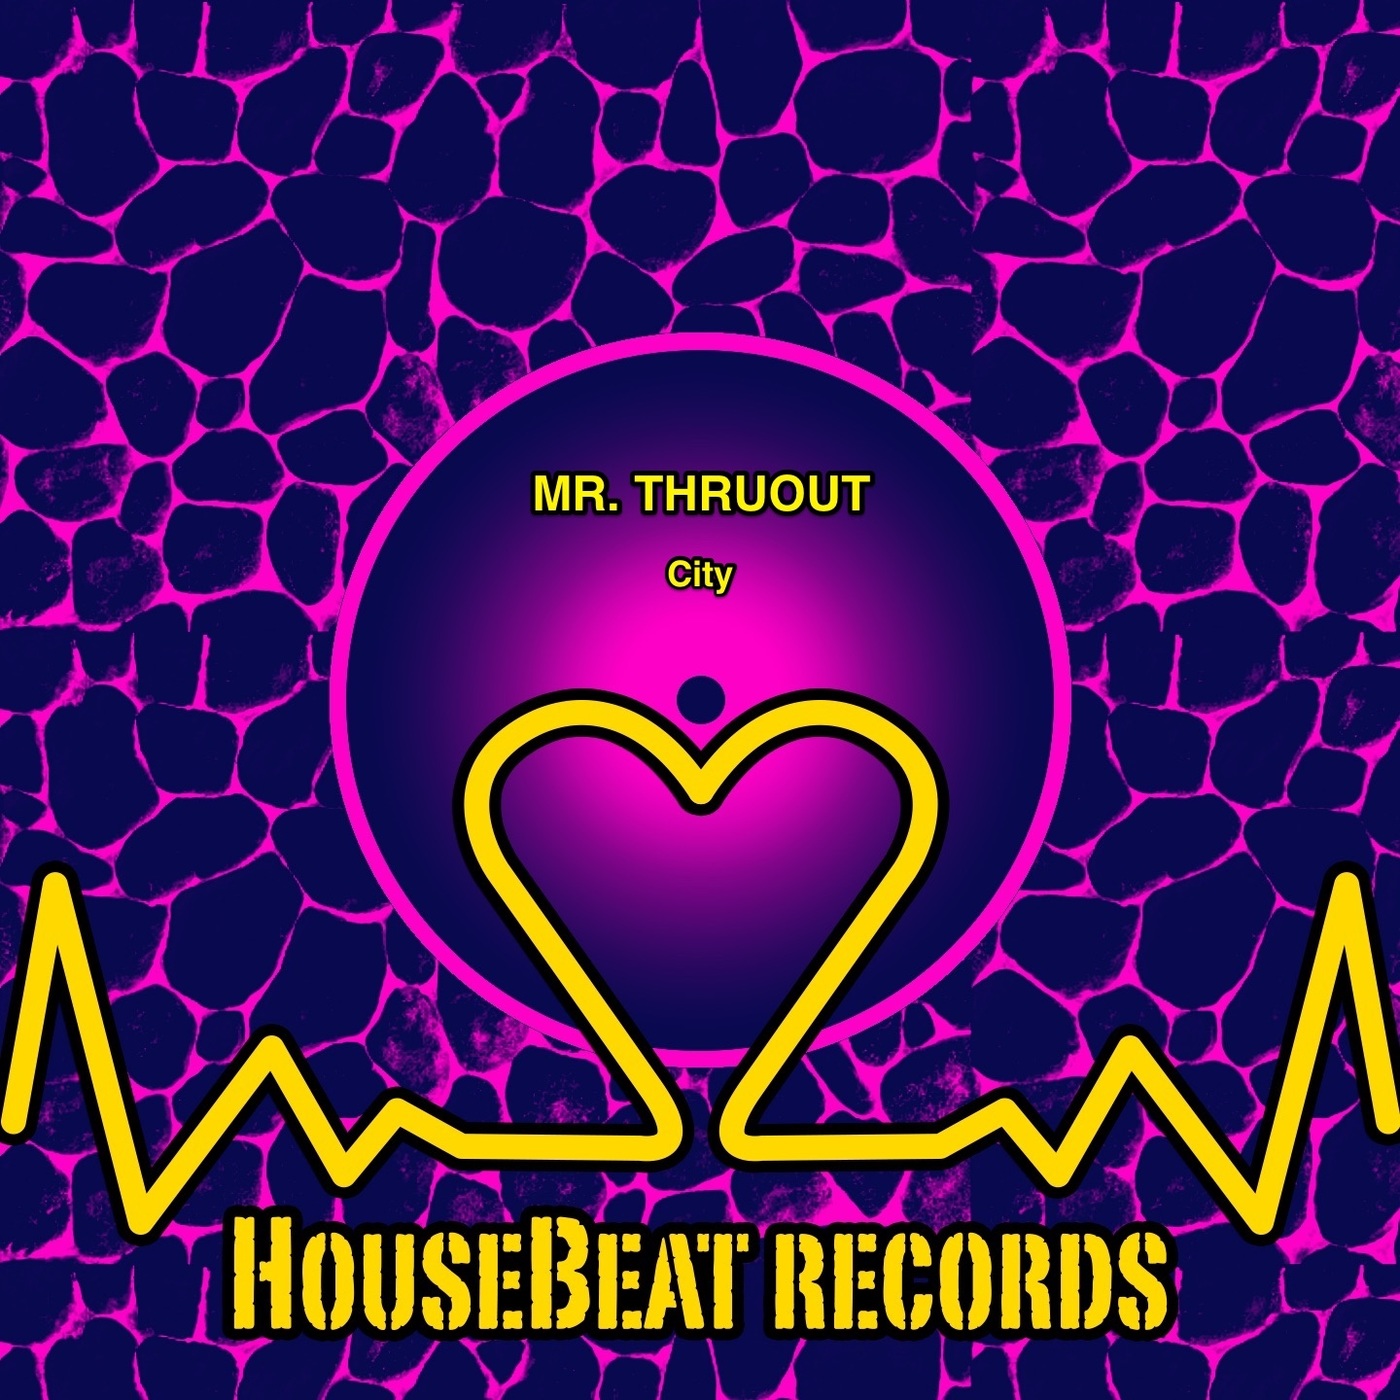 Mr. ThruouT - City / HouseBeat Records